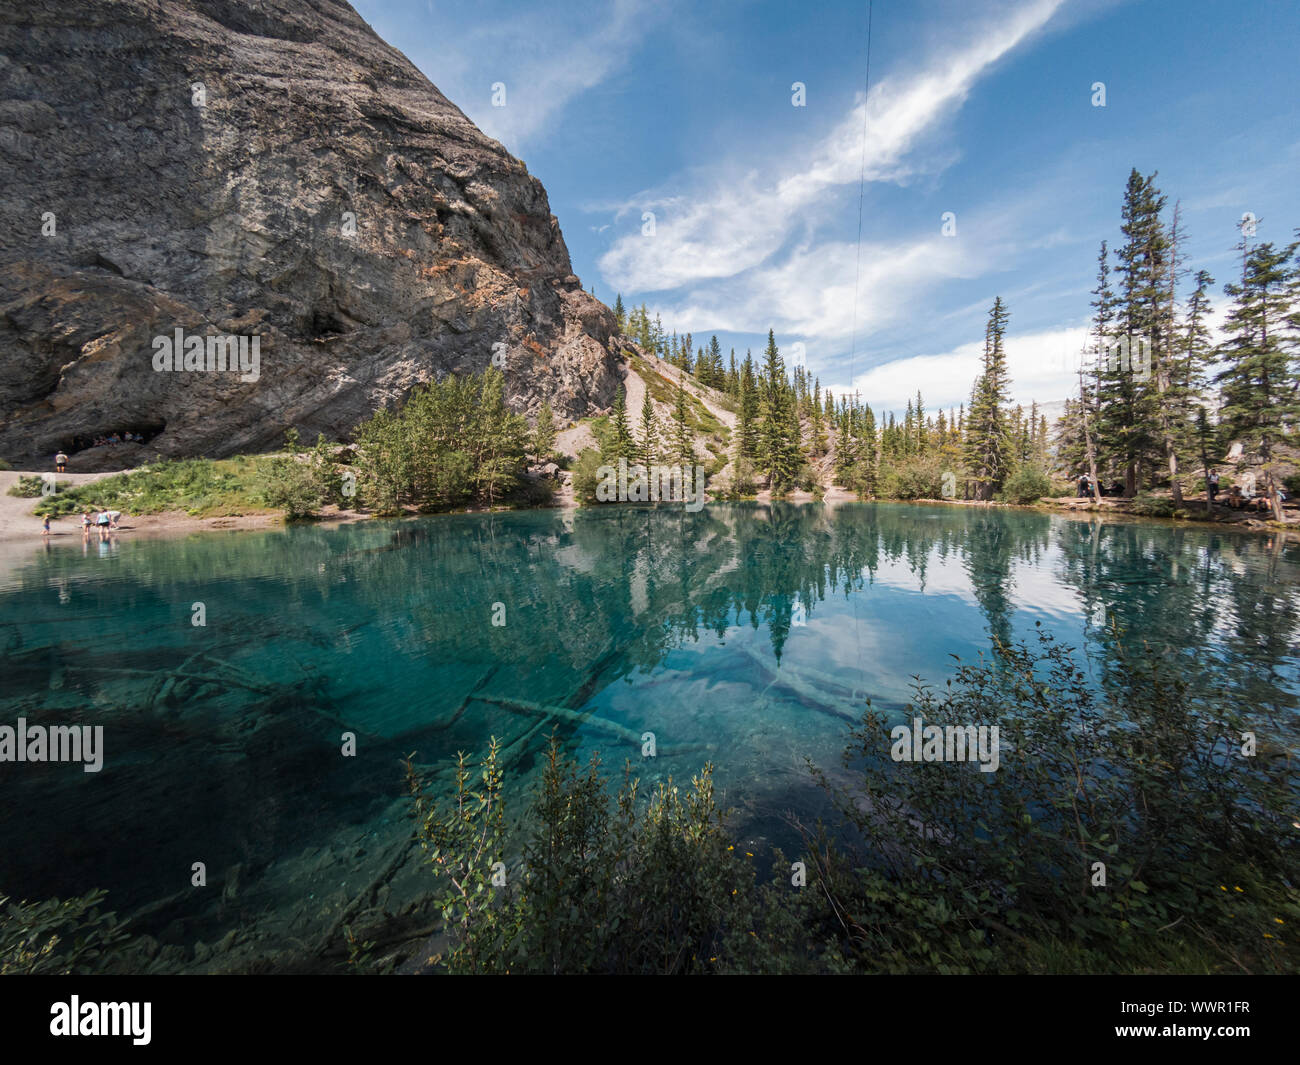 Scenic view of Grassi Lakes and mountains in Canmore, Alberta, Canada. Stock Photo